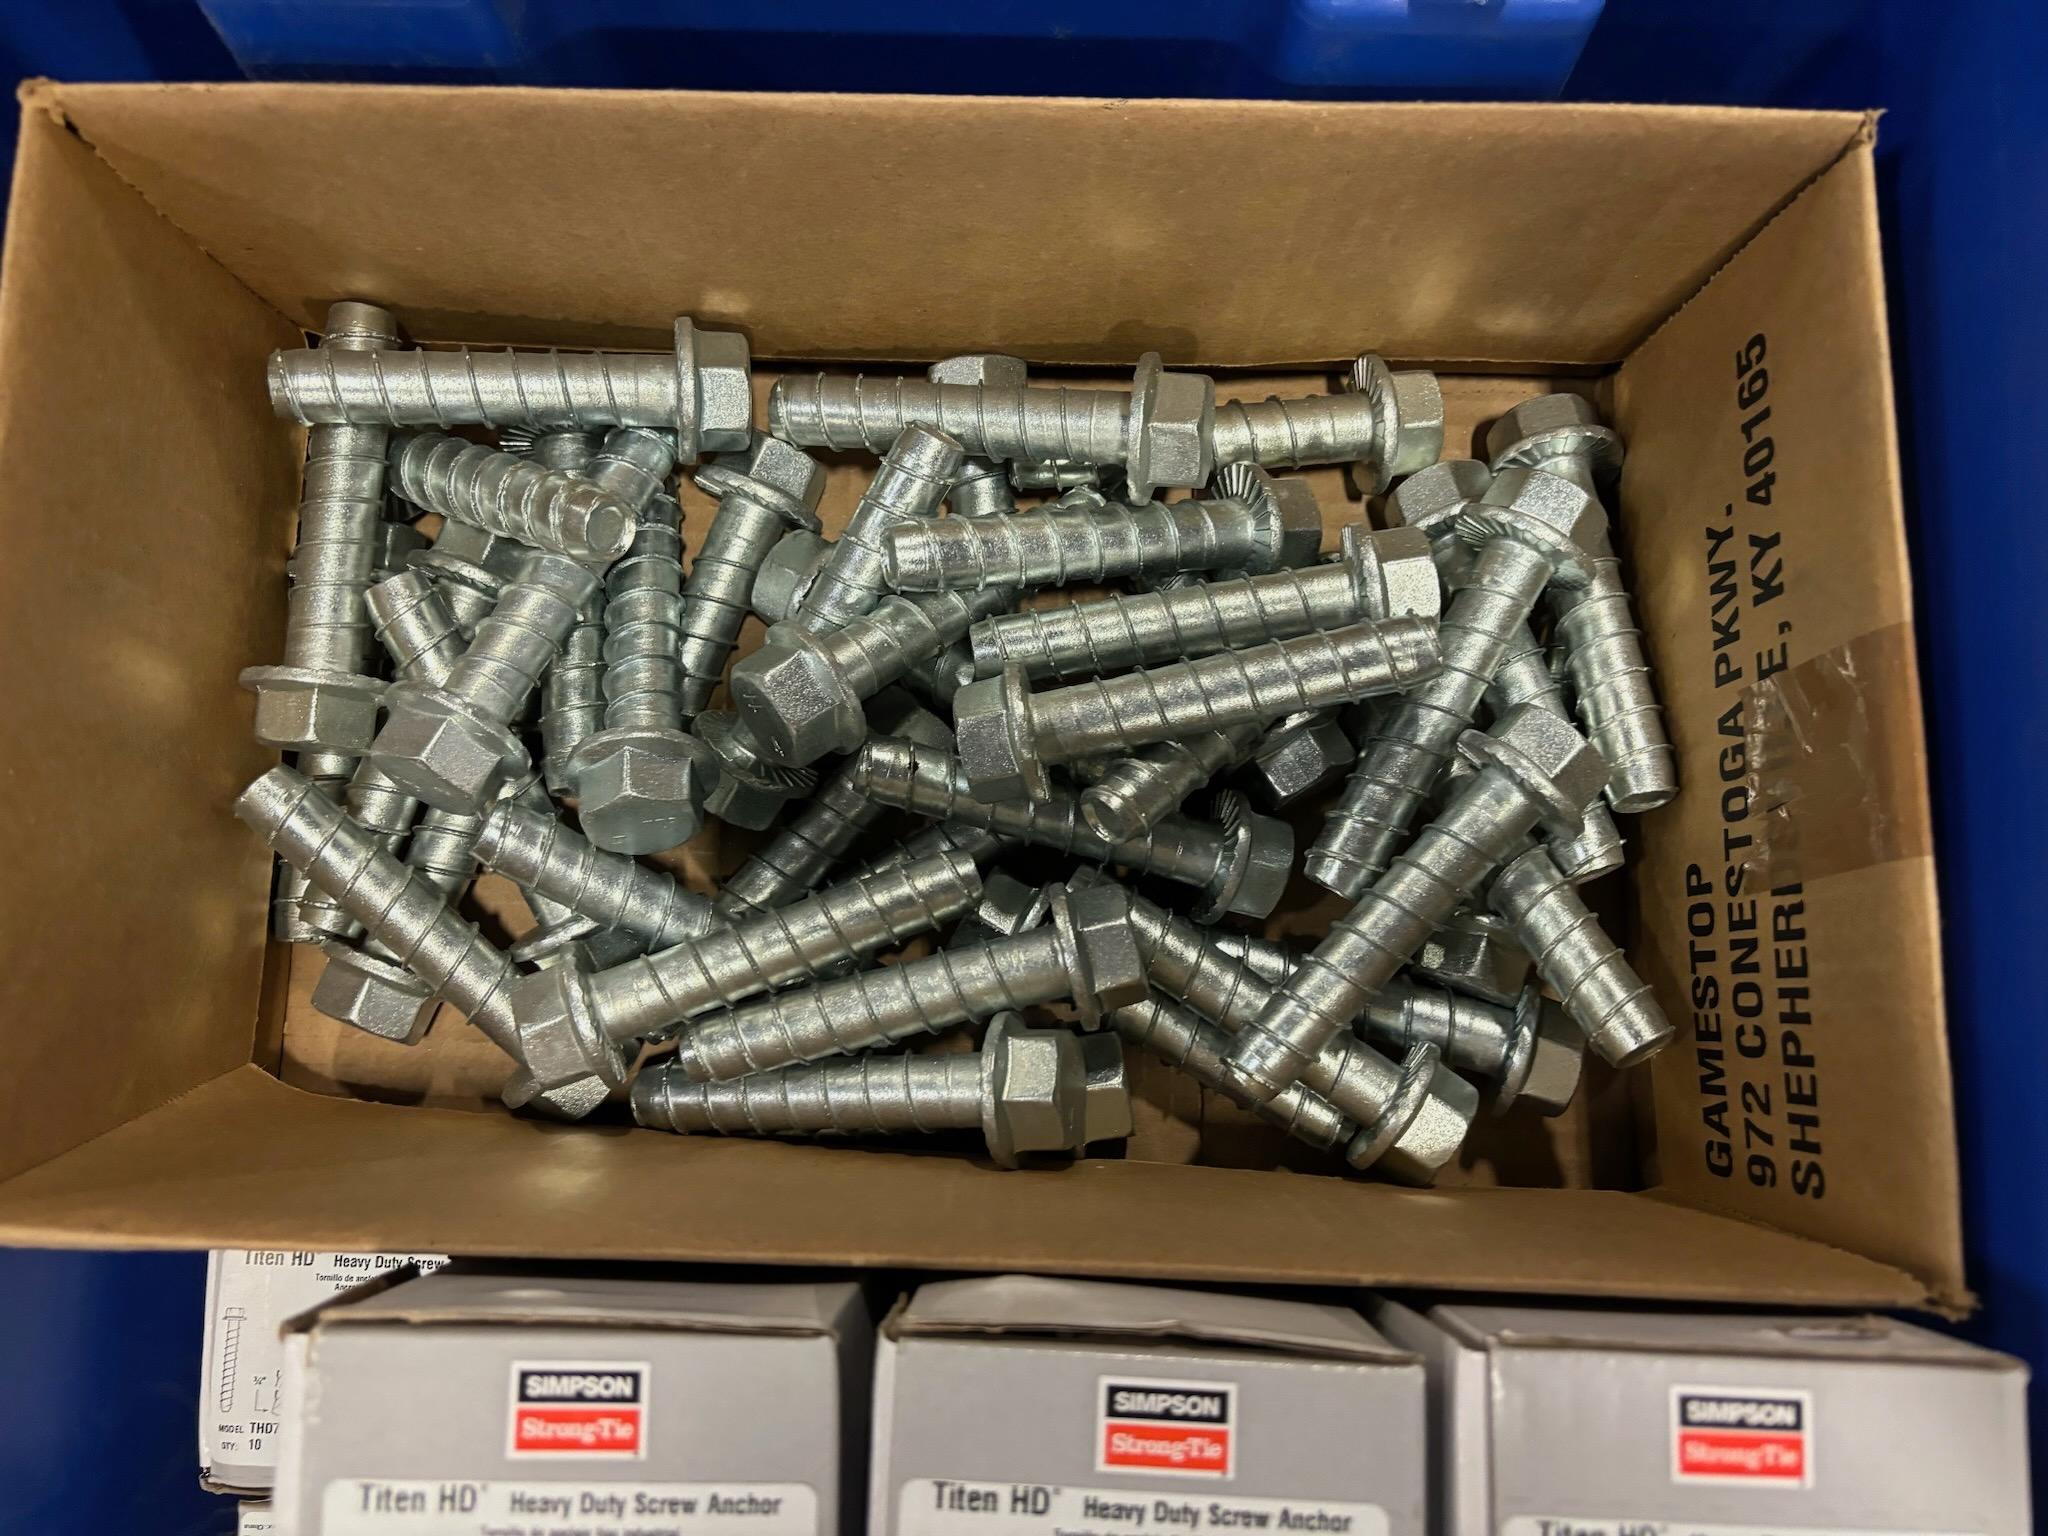 Assorted Anchor bolts